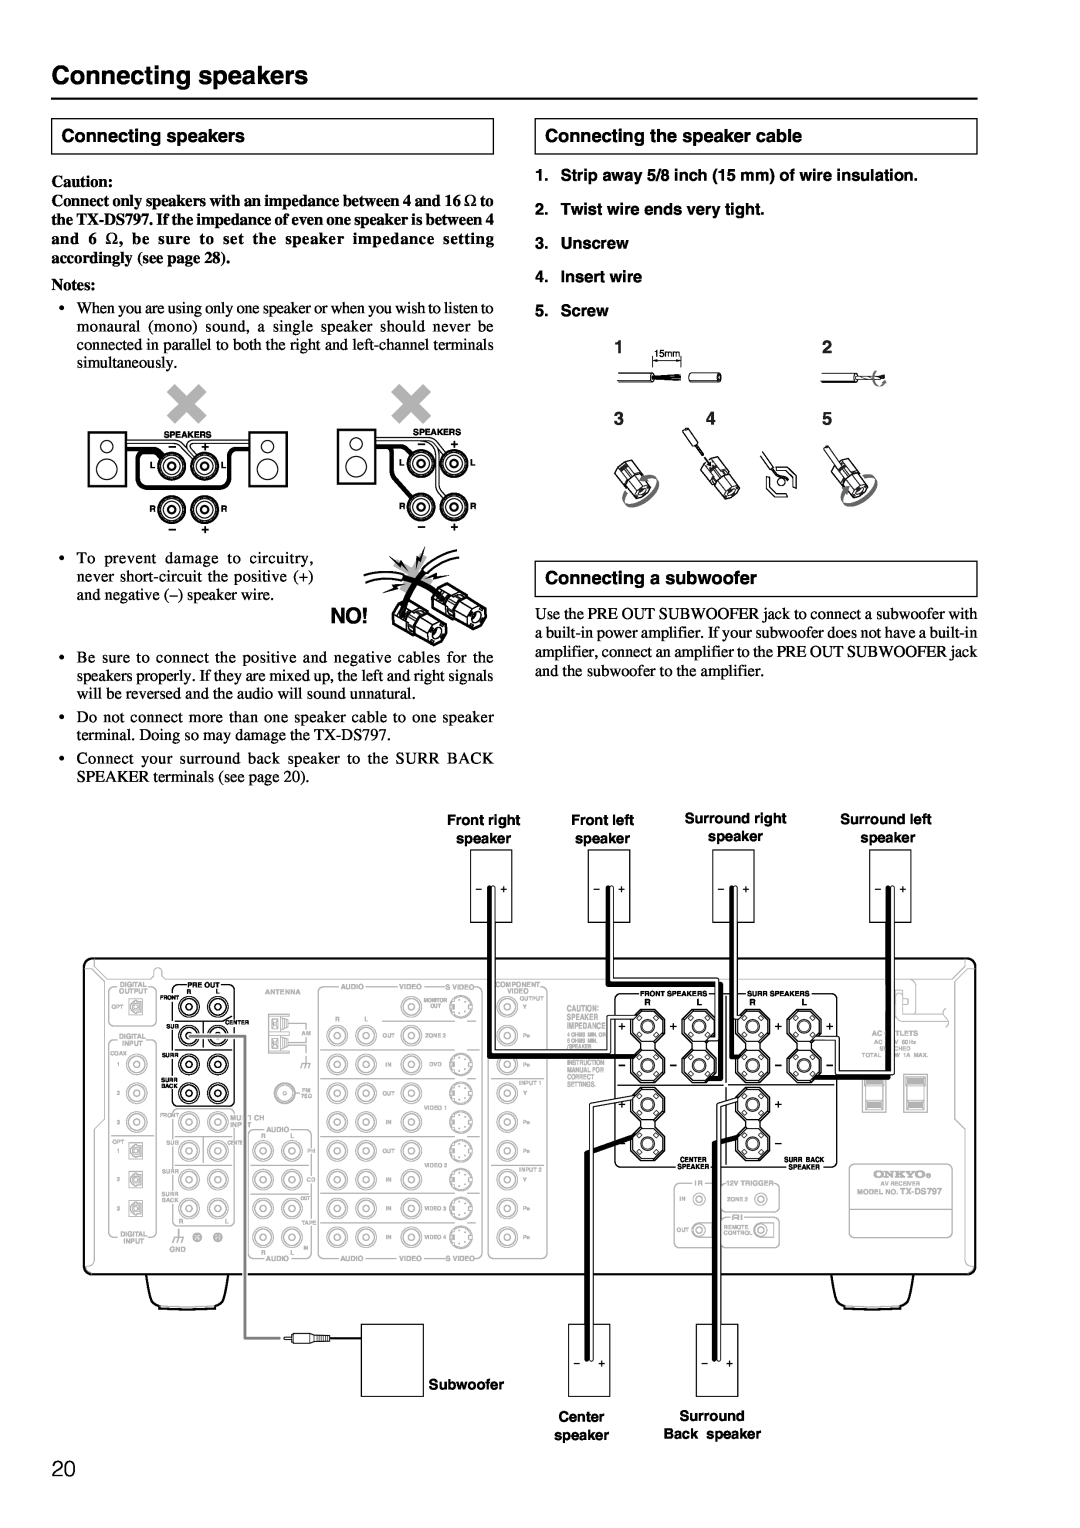 Onkyo TX-DS797 instruction manual Connecting speakers, Connecting the speaker cable, Connecting a subwoofer 